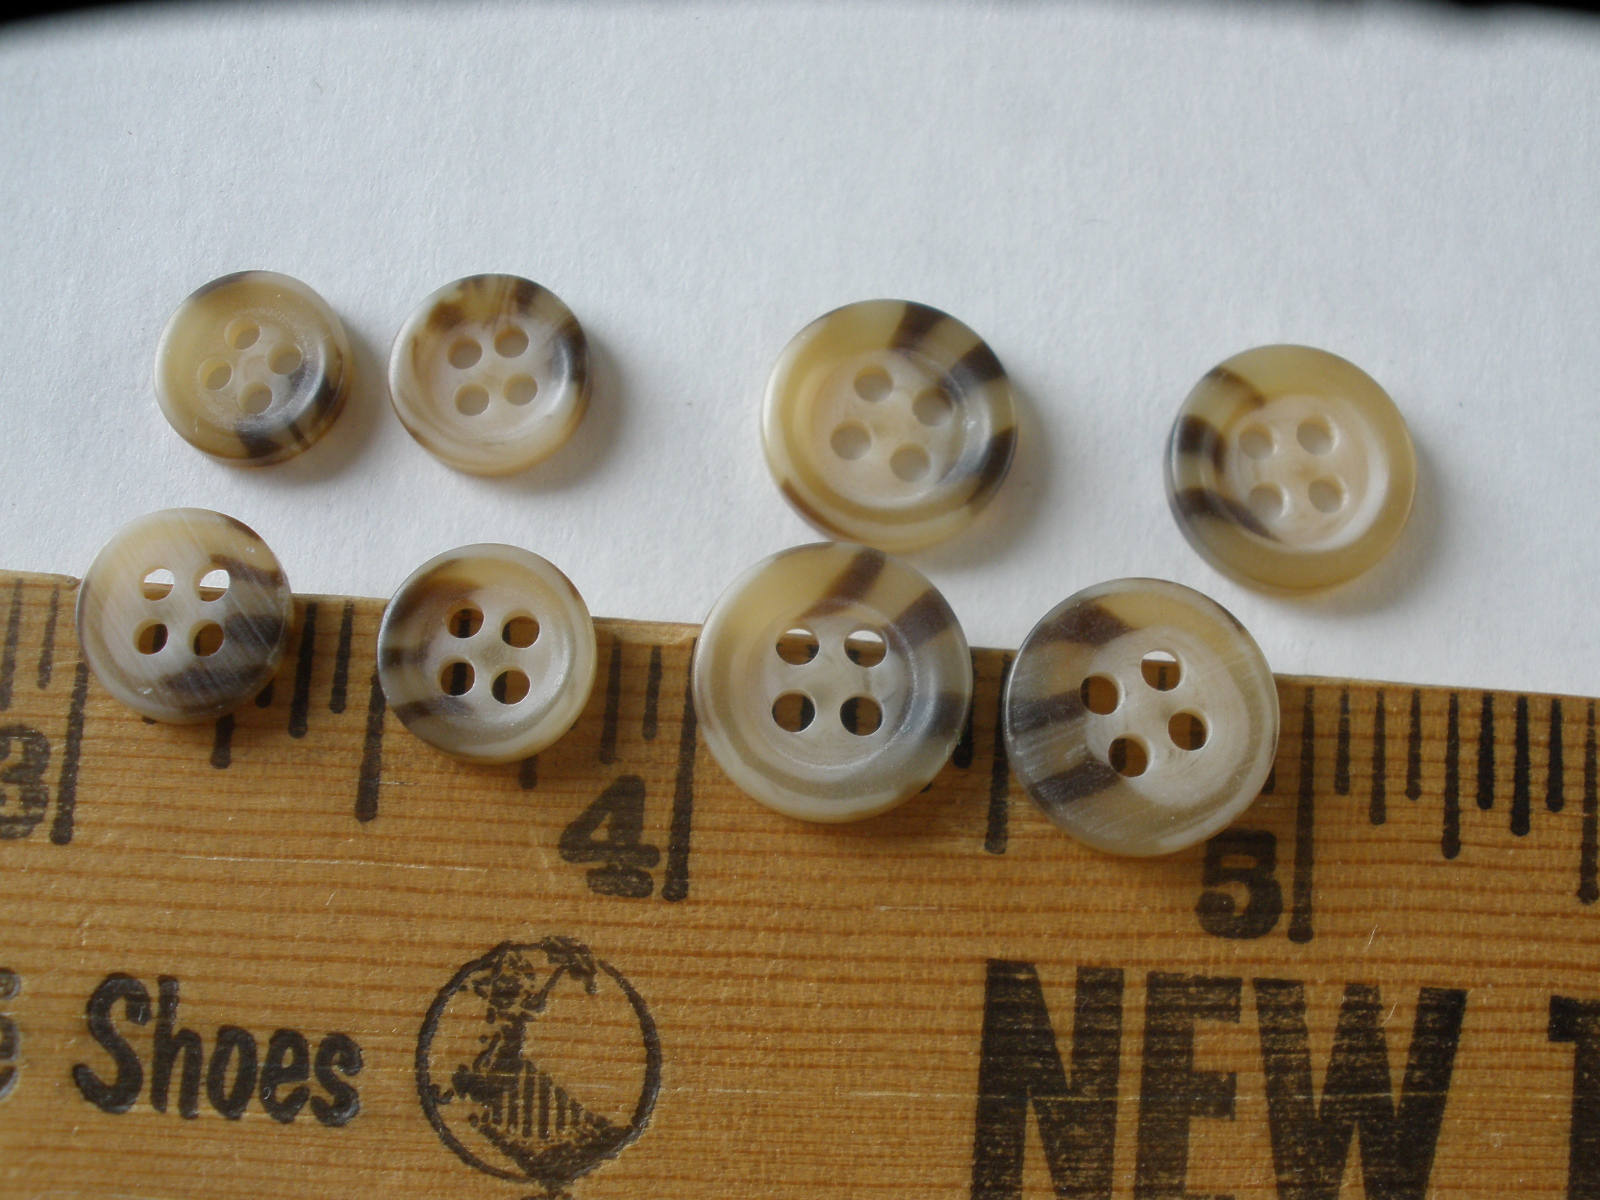 Vintage Antique Small White Mother of Pearl 4 Hole Buttons 3/8-7/16 Set of  30